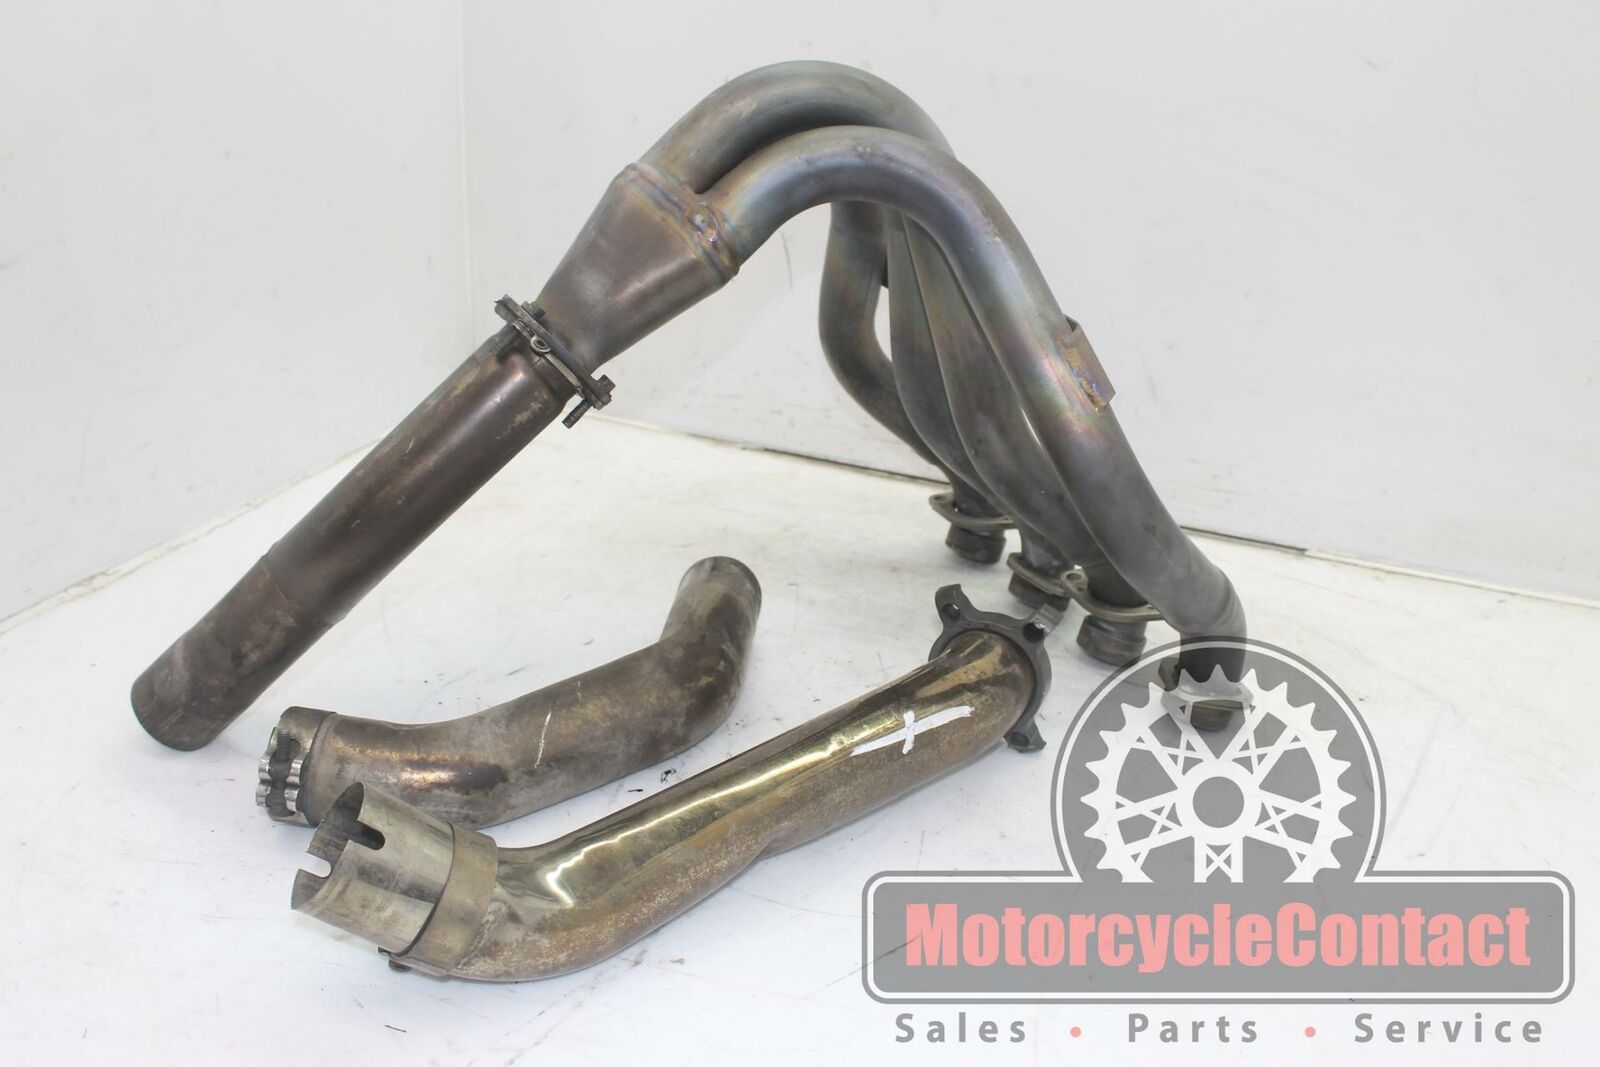 06-07 ZX-10R ZX10 FULL EXHAUST SYSTEM HEADER PIPES MID MID Y SLIP ON